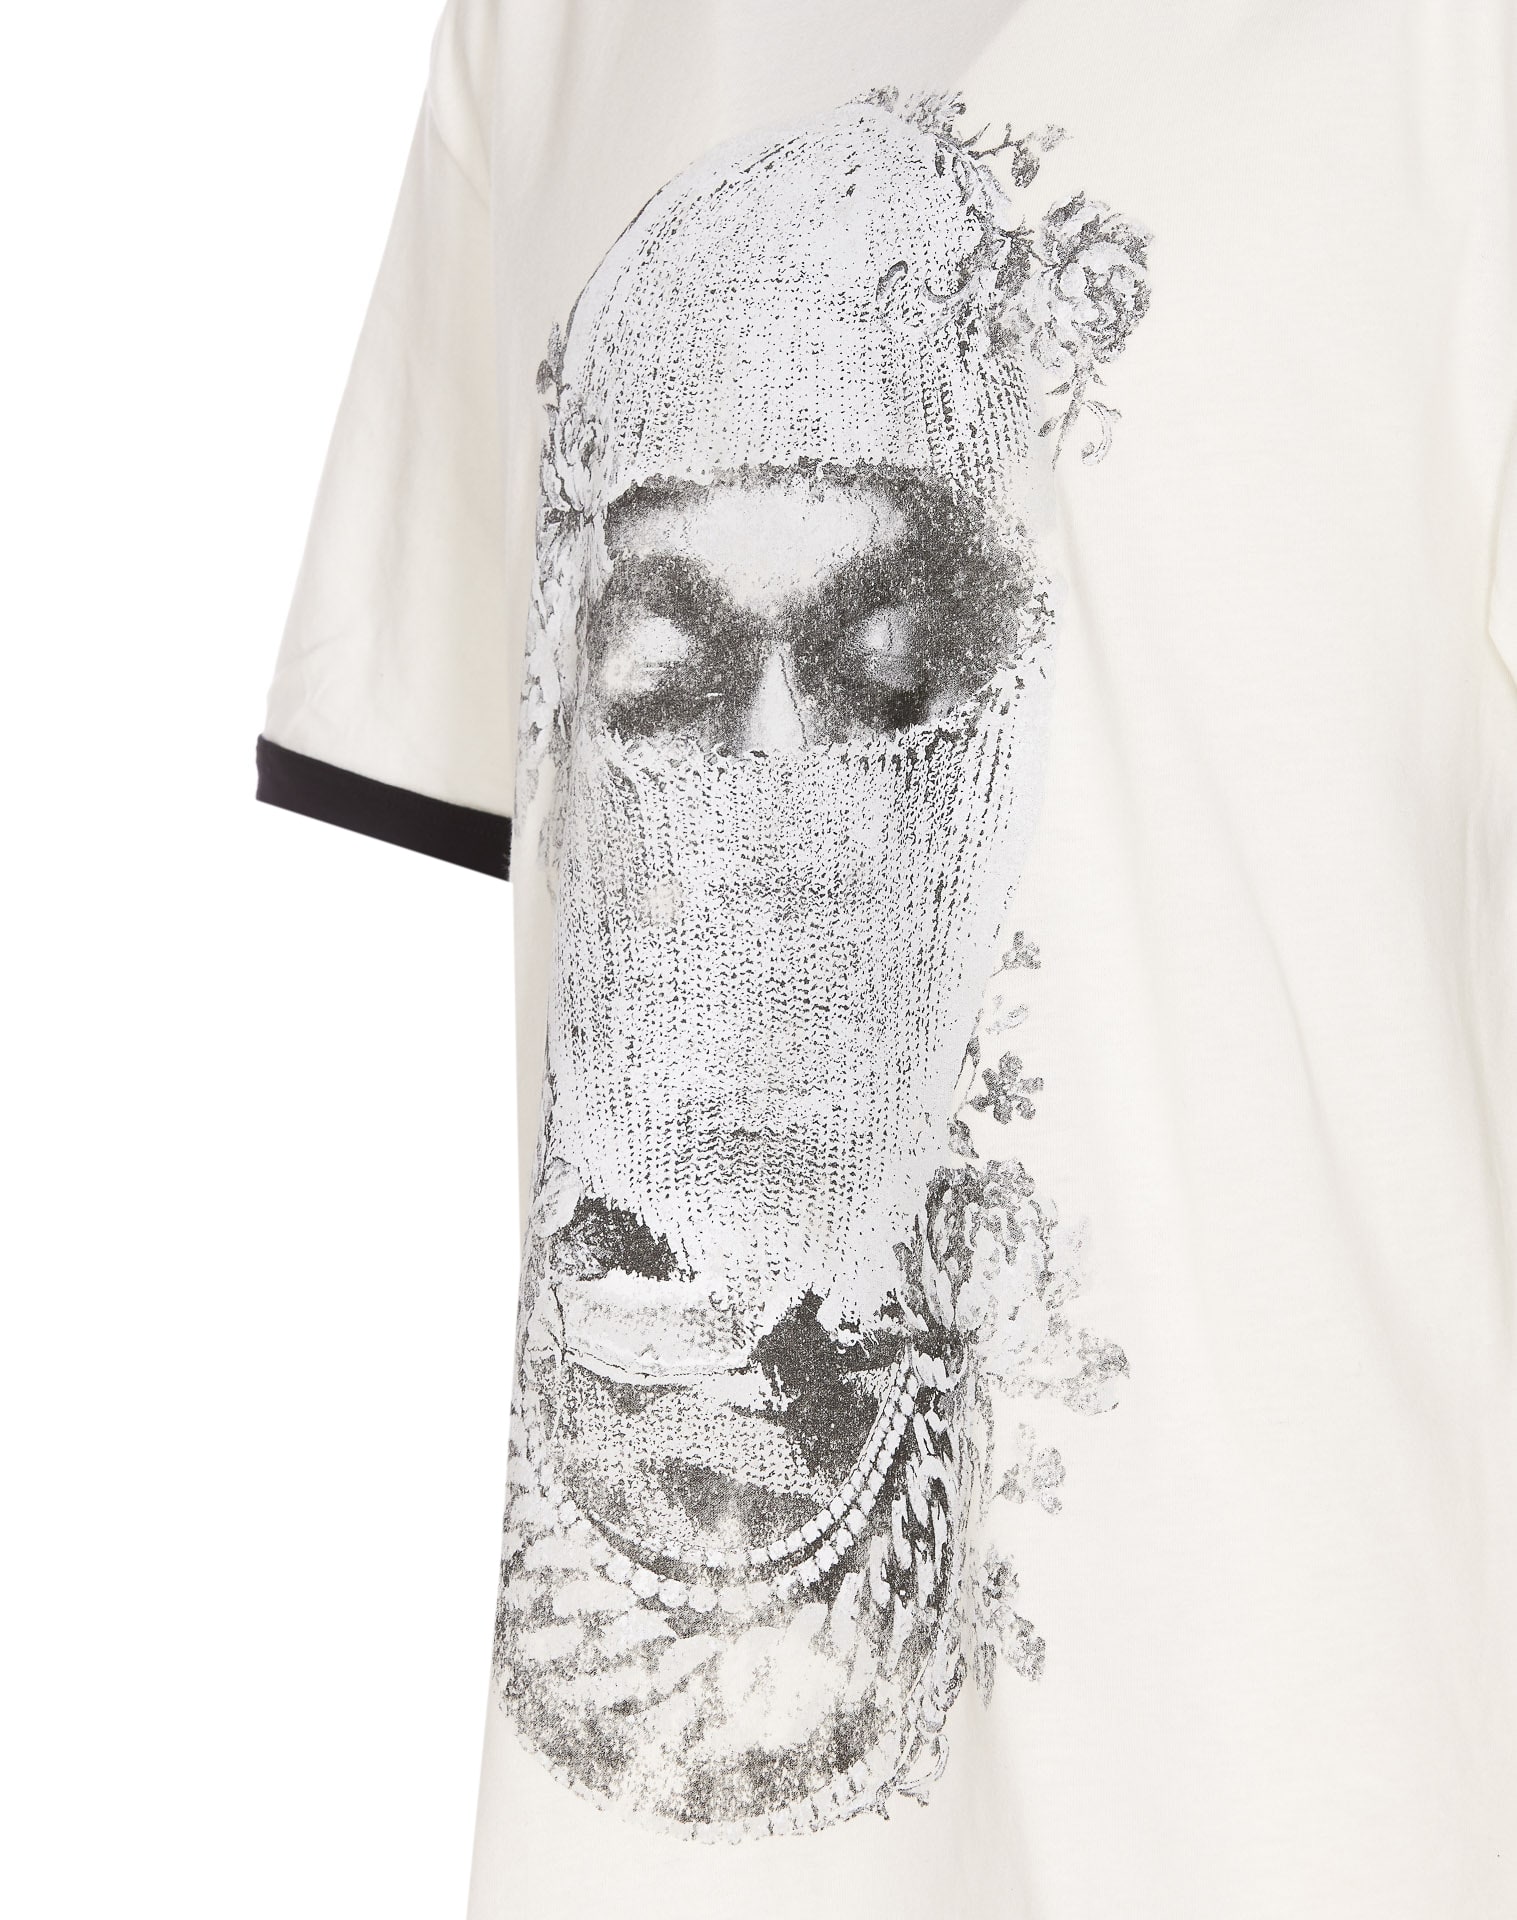 Shop Ih Nom Uh Nit Mask Roses Distressed Print And Logo T-shirt In White